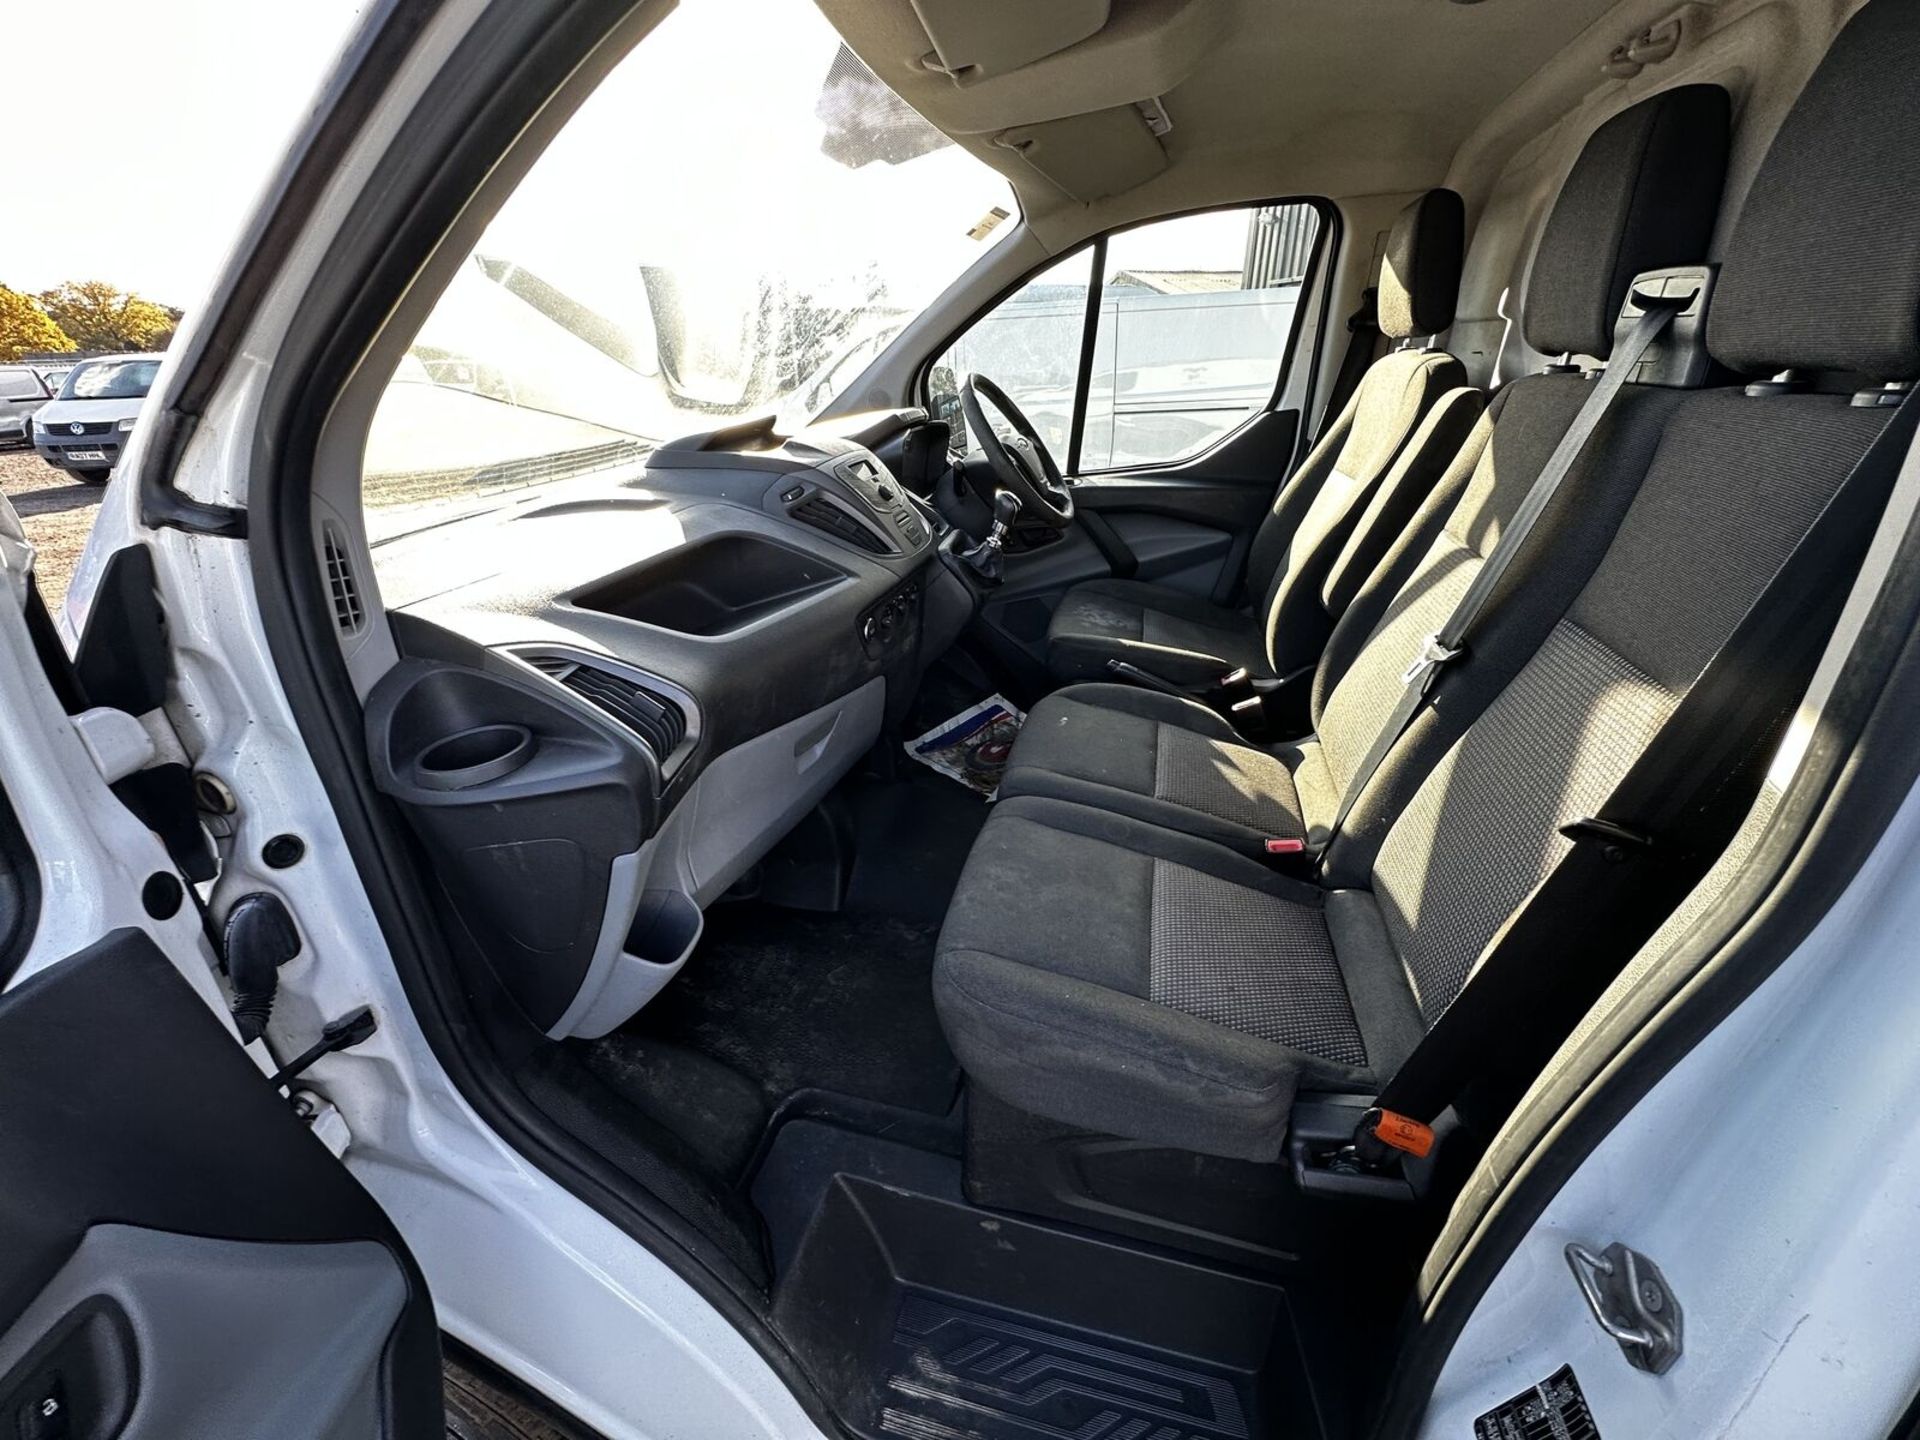 AFFORDABLE WORKHORSE: 2014 FORD TRANSIT CUSTOM 270 L1 LOW ROOF - Image 5 of 15